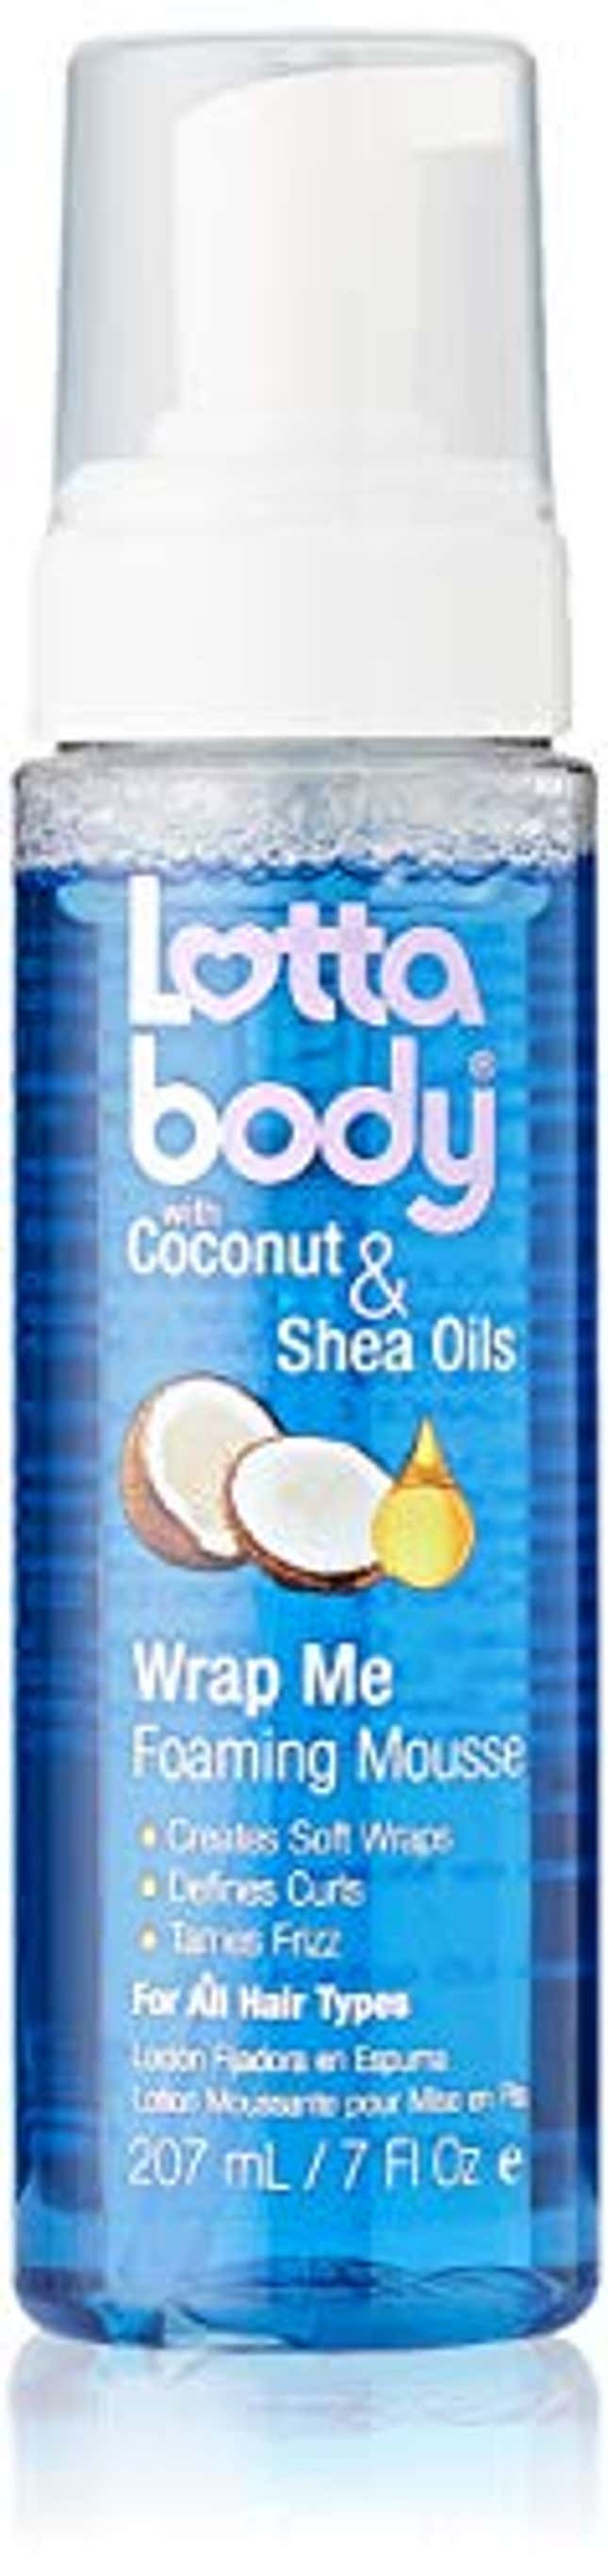 Lottabody Coconut Oil and Shea Wrap Me Foaming Curl Mousse , Now 31% Off